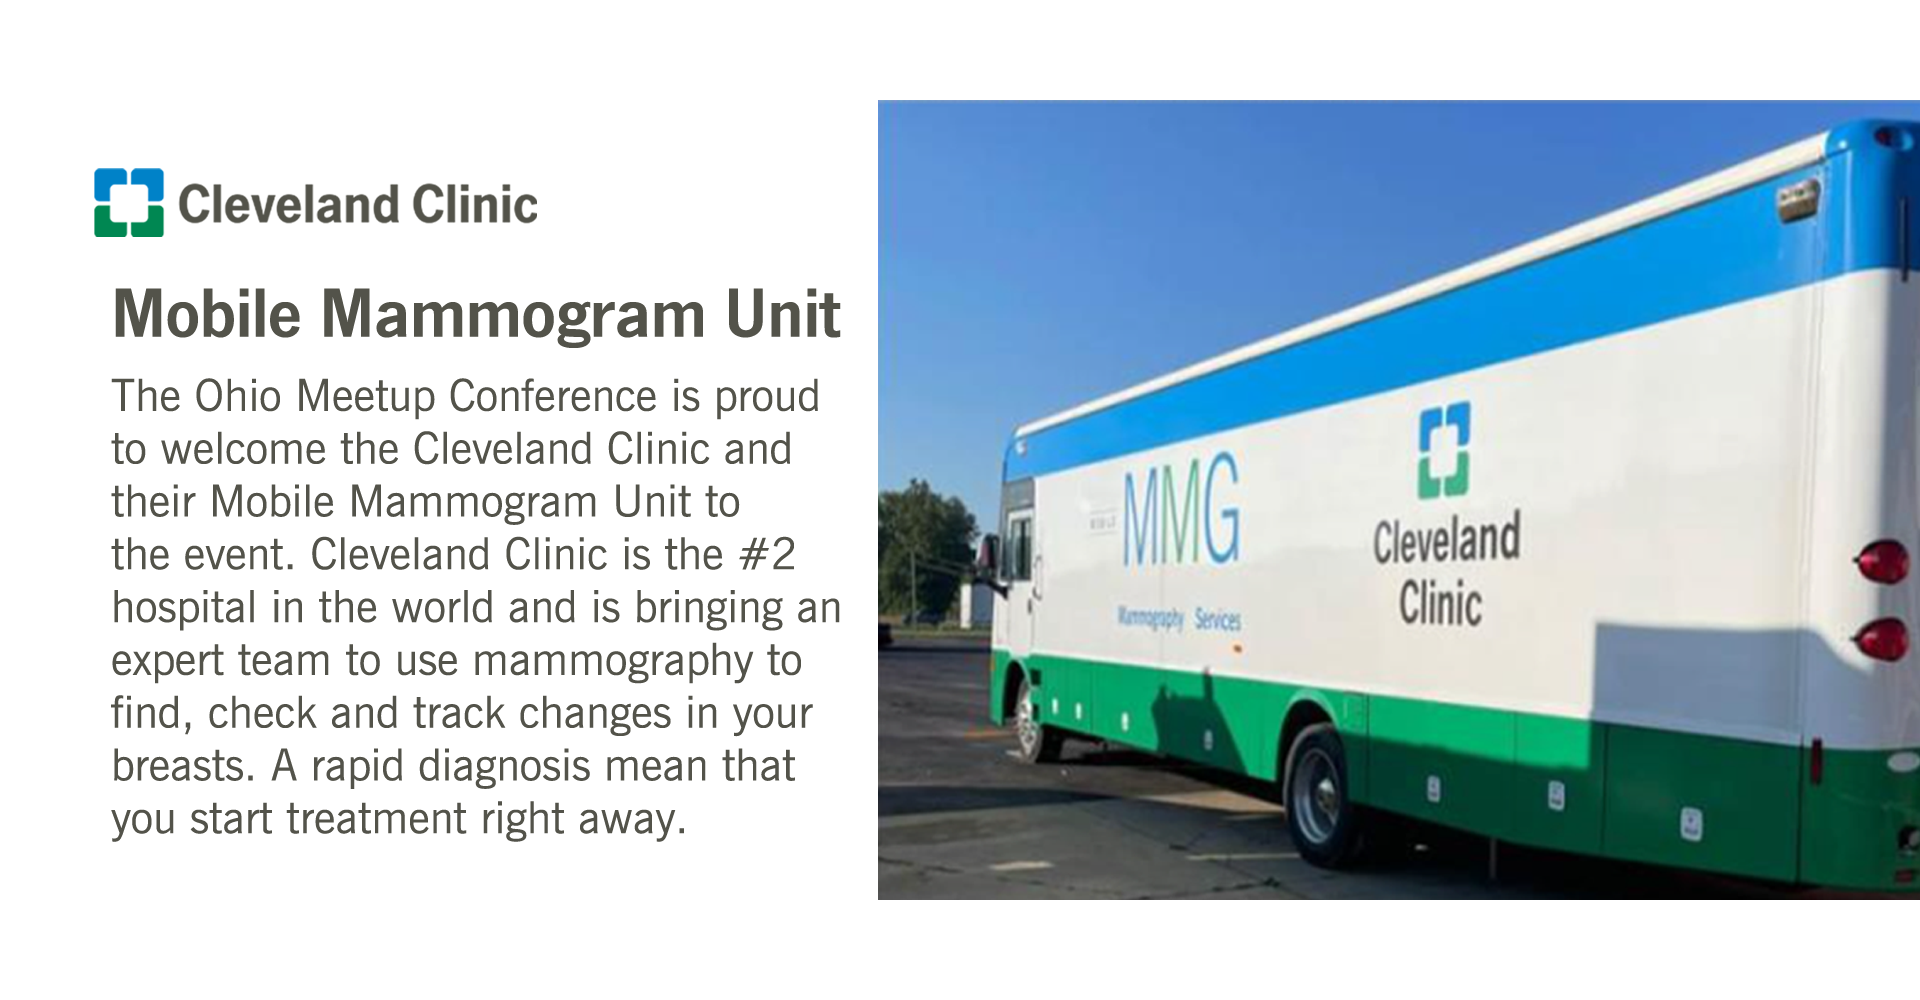 Cleveland Clinic MMG